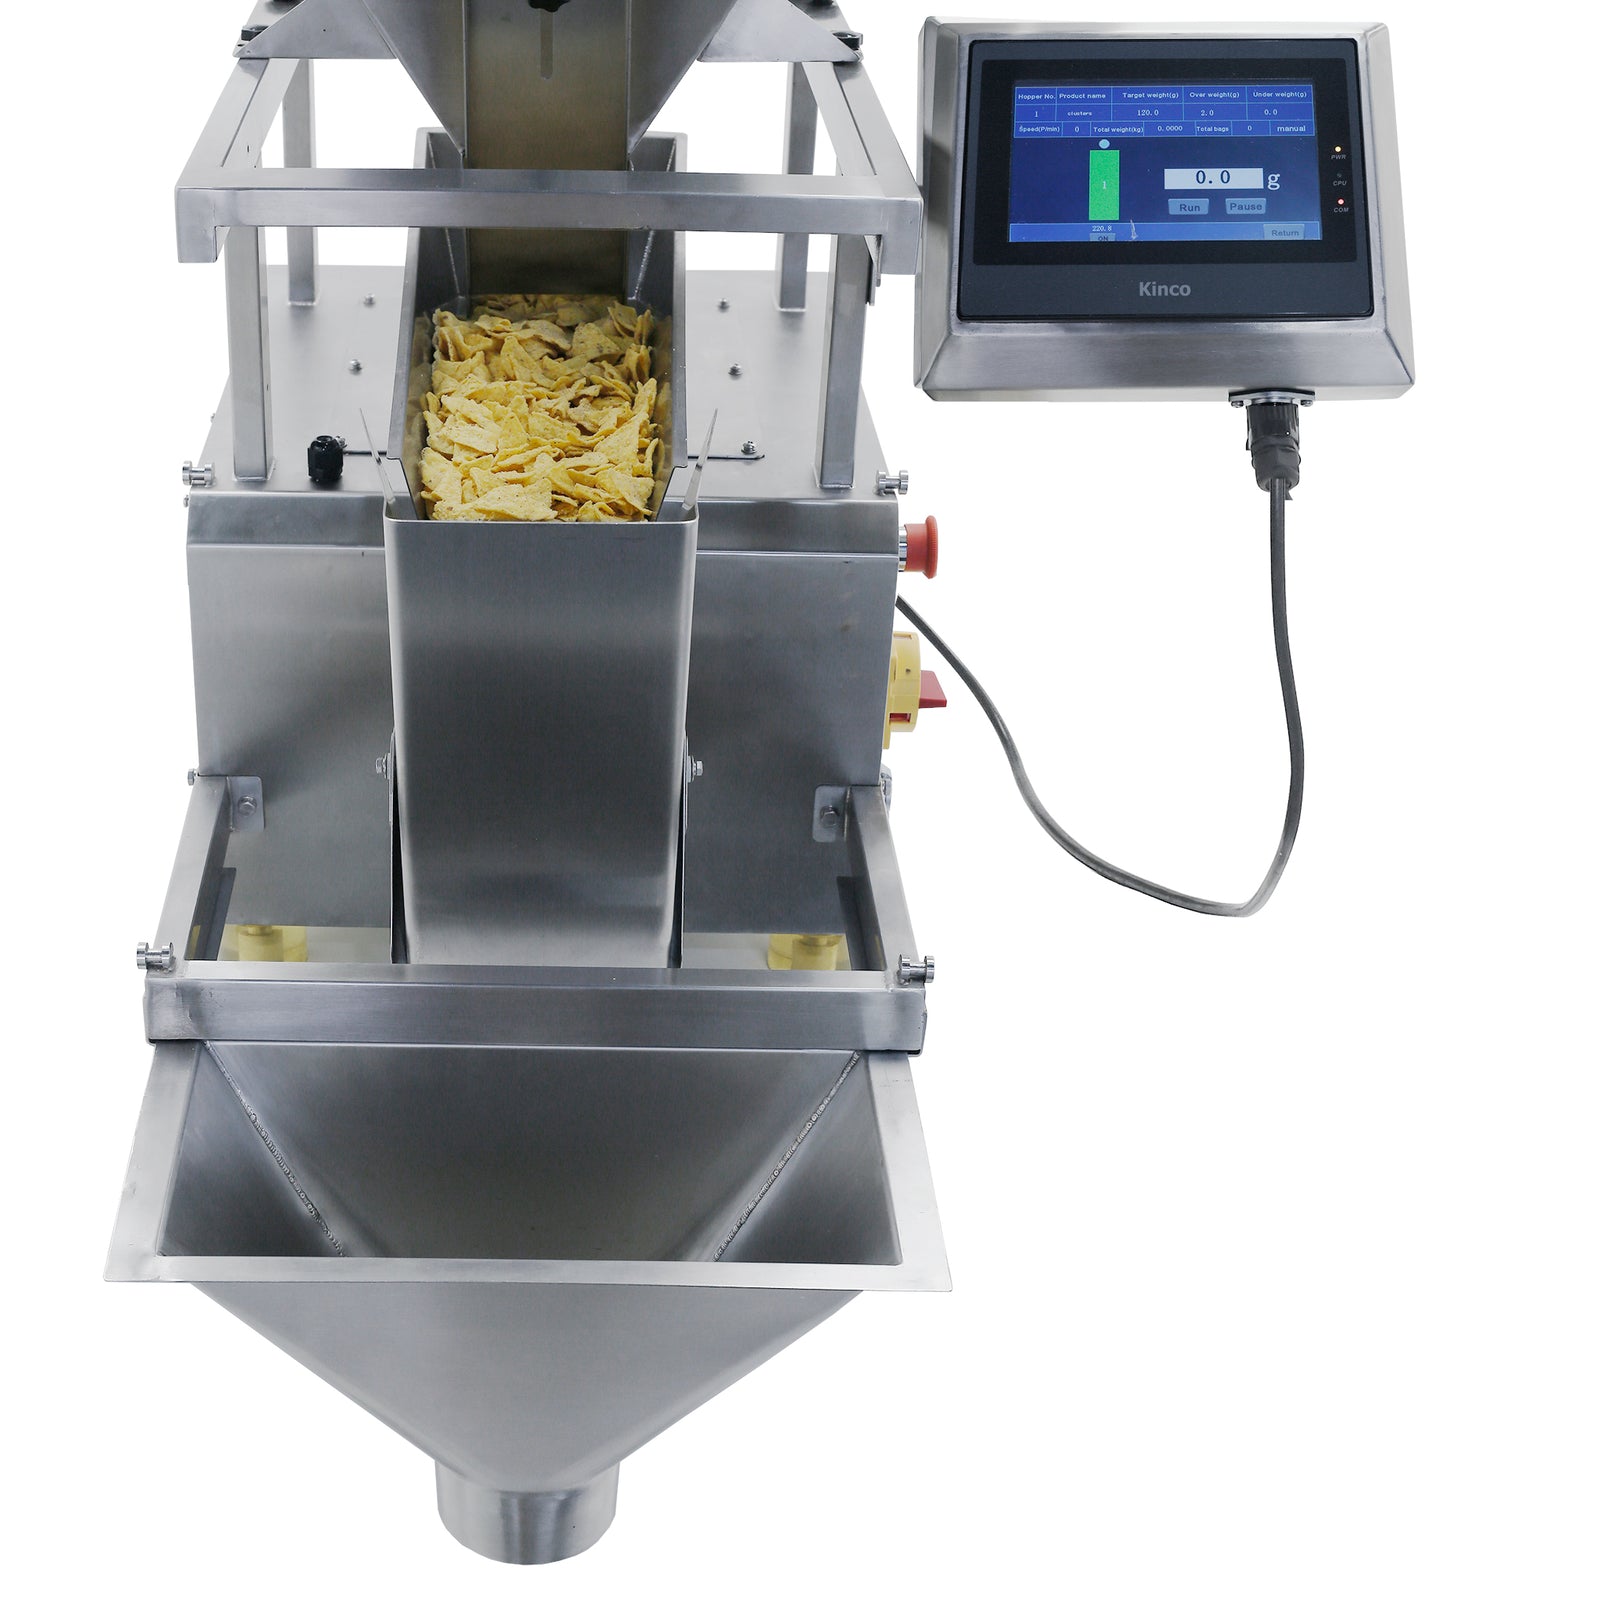 Top view of a linear weigher with potato chips inside, free flow moving, ready to be weighed, dispensed and packaged